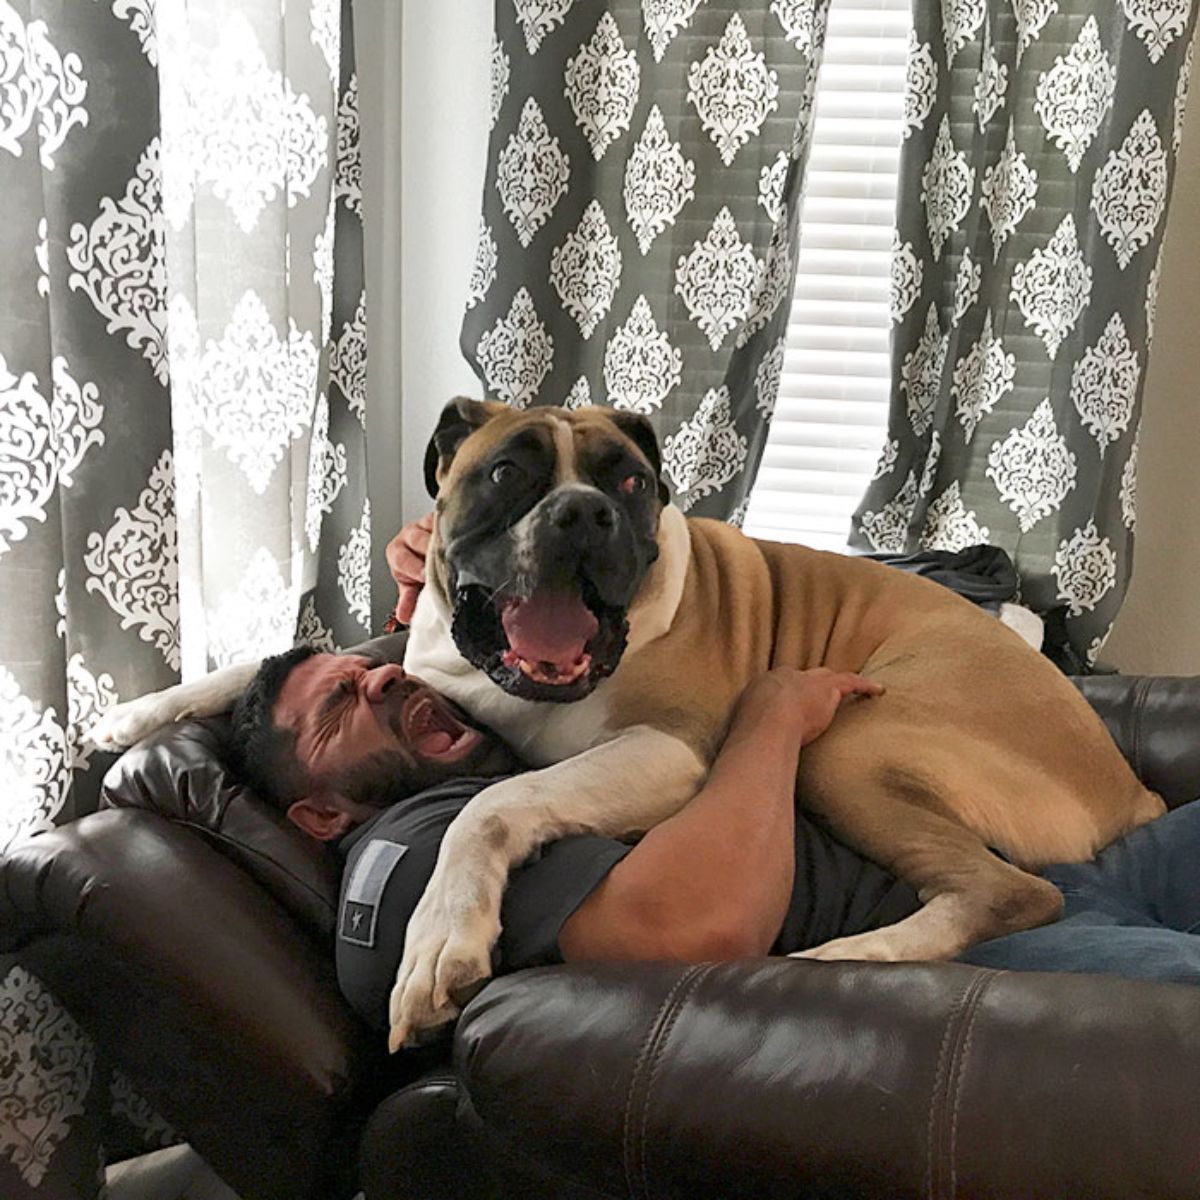 large brown and white dog laying on a man and both of them are screaming